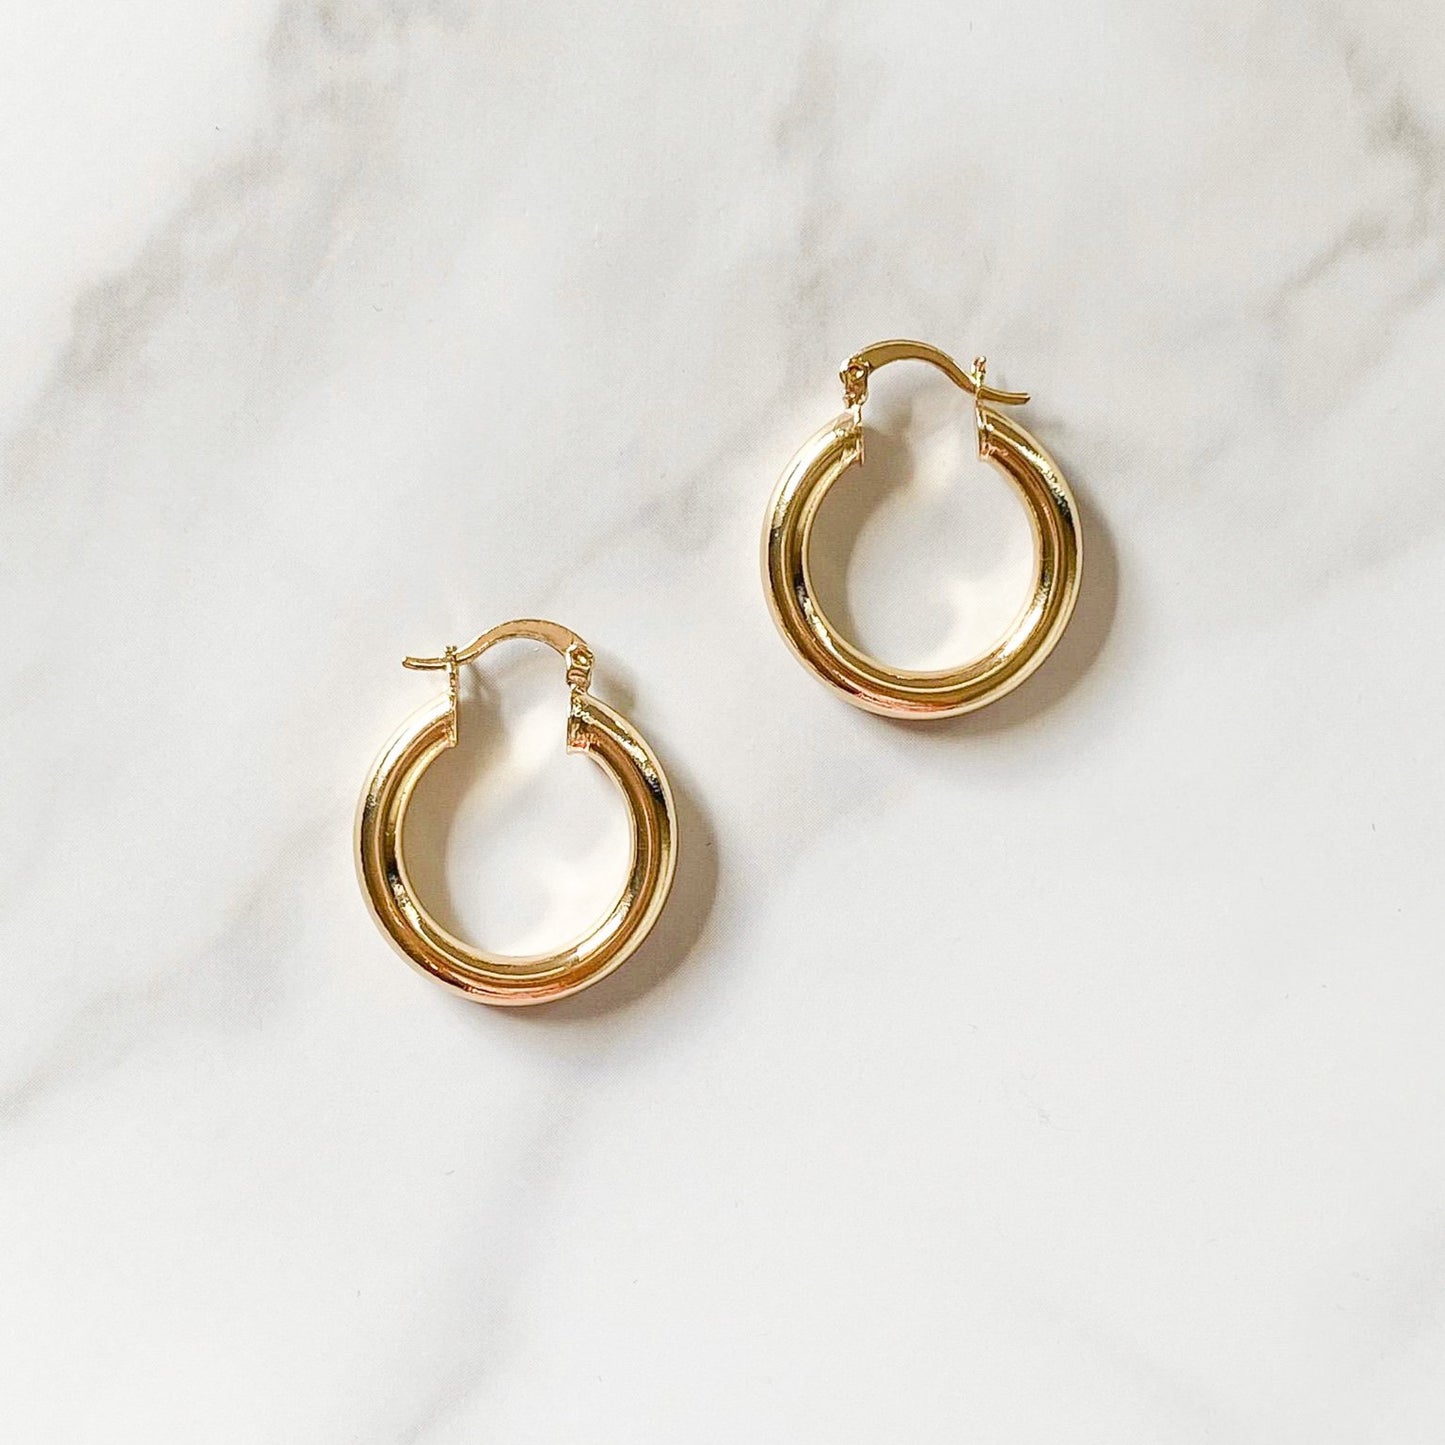 Chunky gold-filled hoops made in Brazil, hypoallergenic and water-resistant by ISVI Boutique Miami